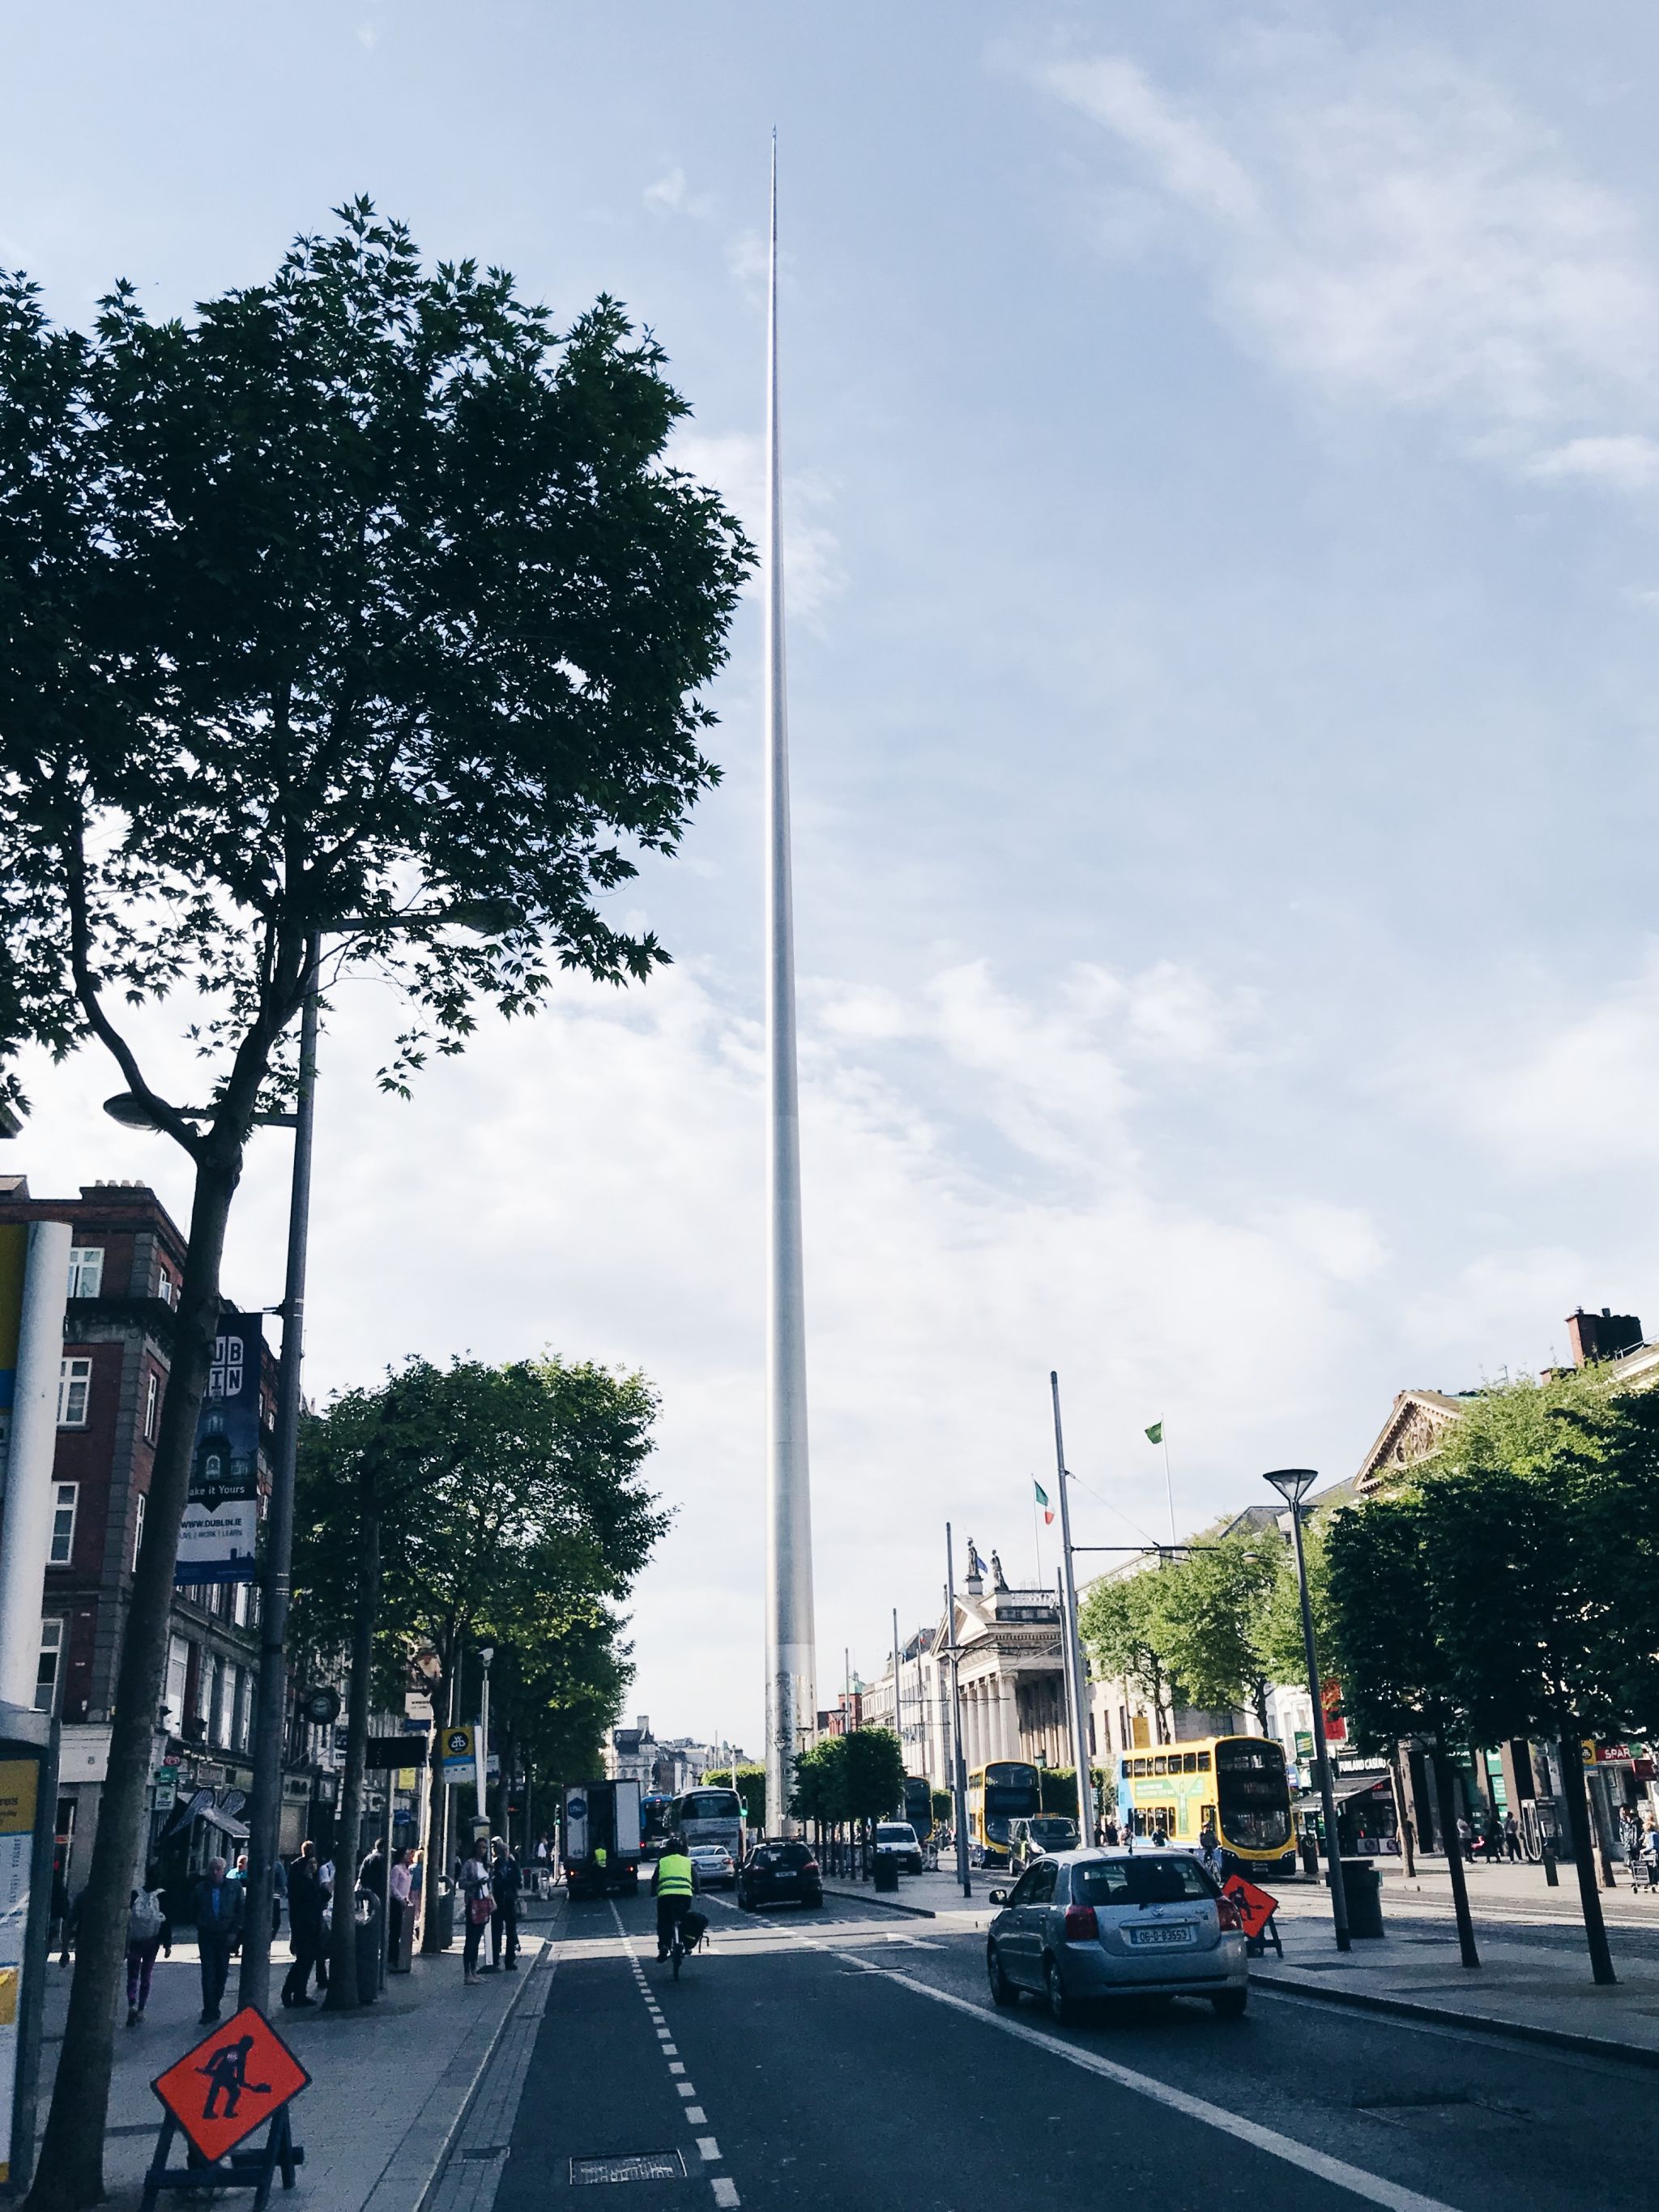 Dublin in a day - take a look at the dublin spire 